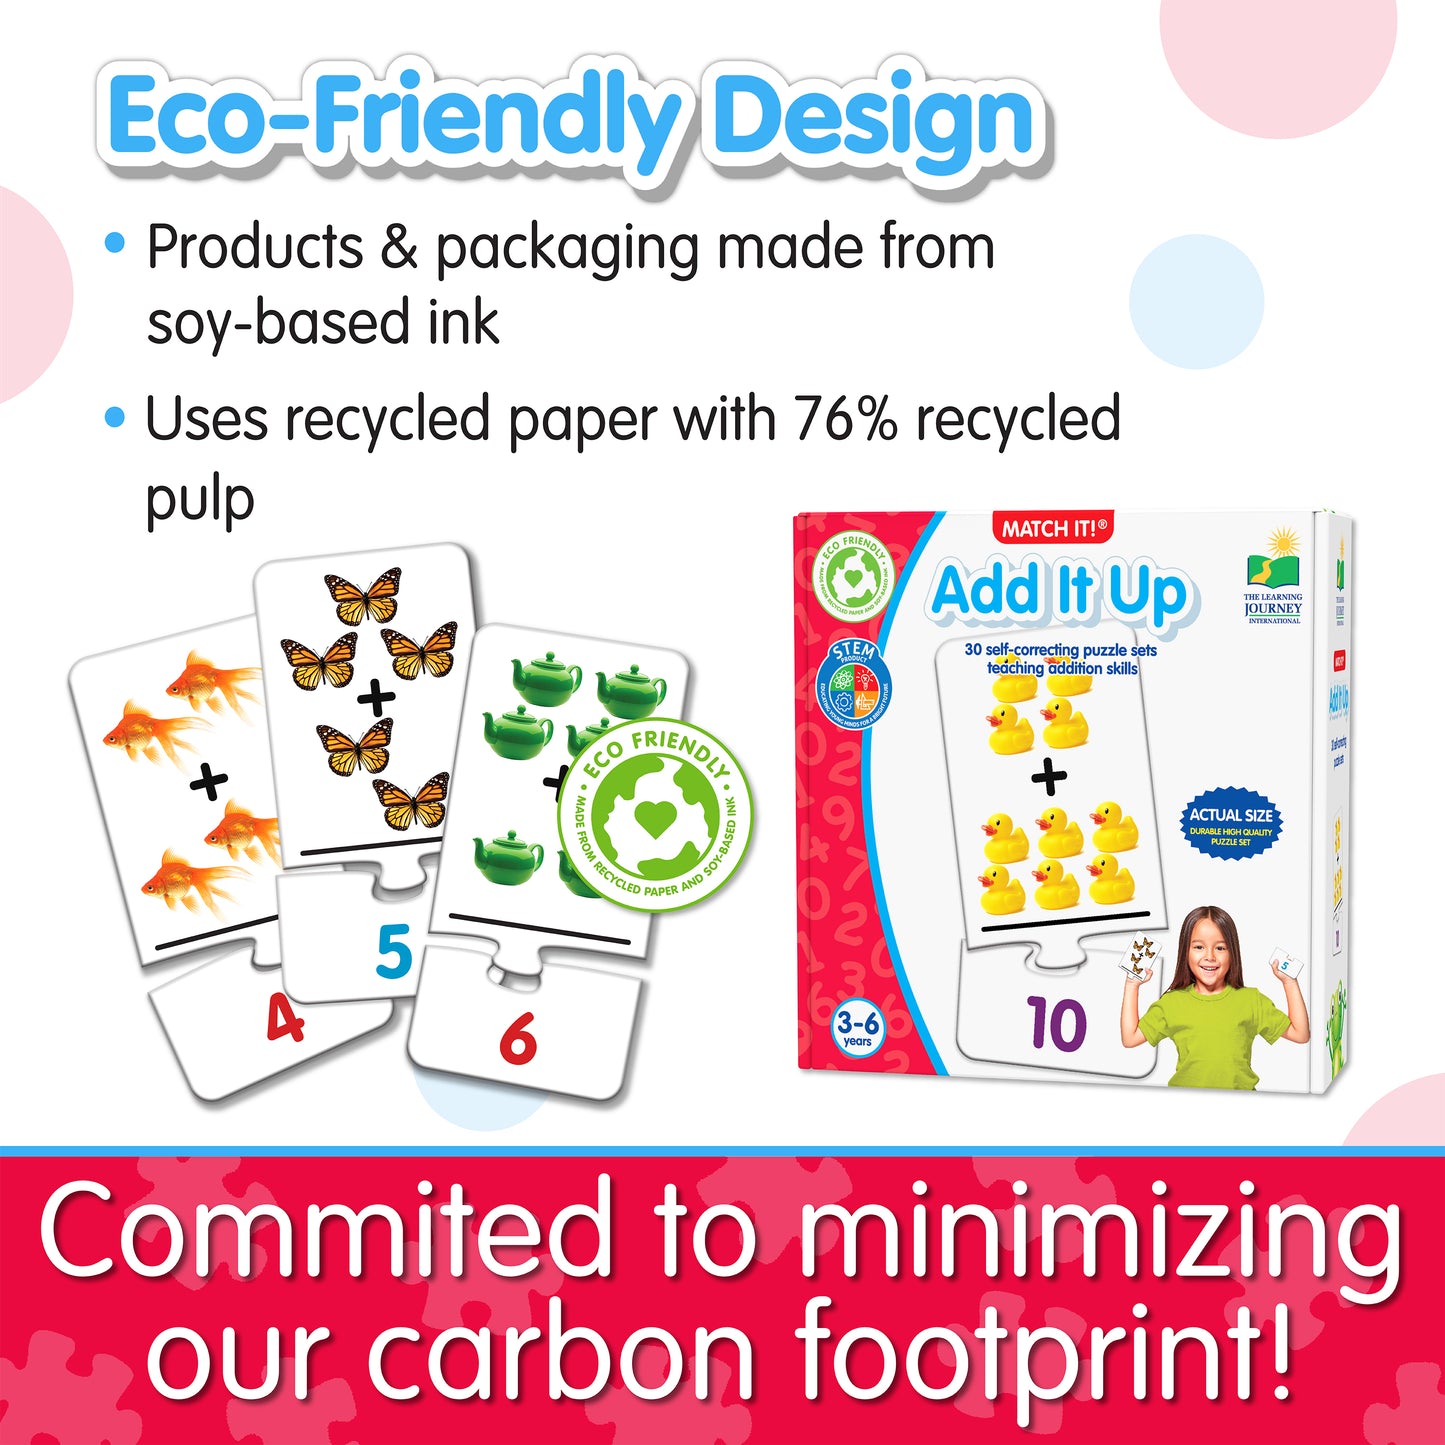 Infographic about Match It - Add It Up's eco-friendly design that says, "Committed to minimizing our carbon footprint!"